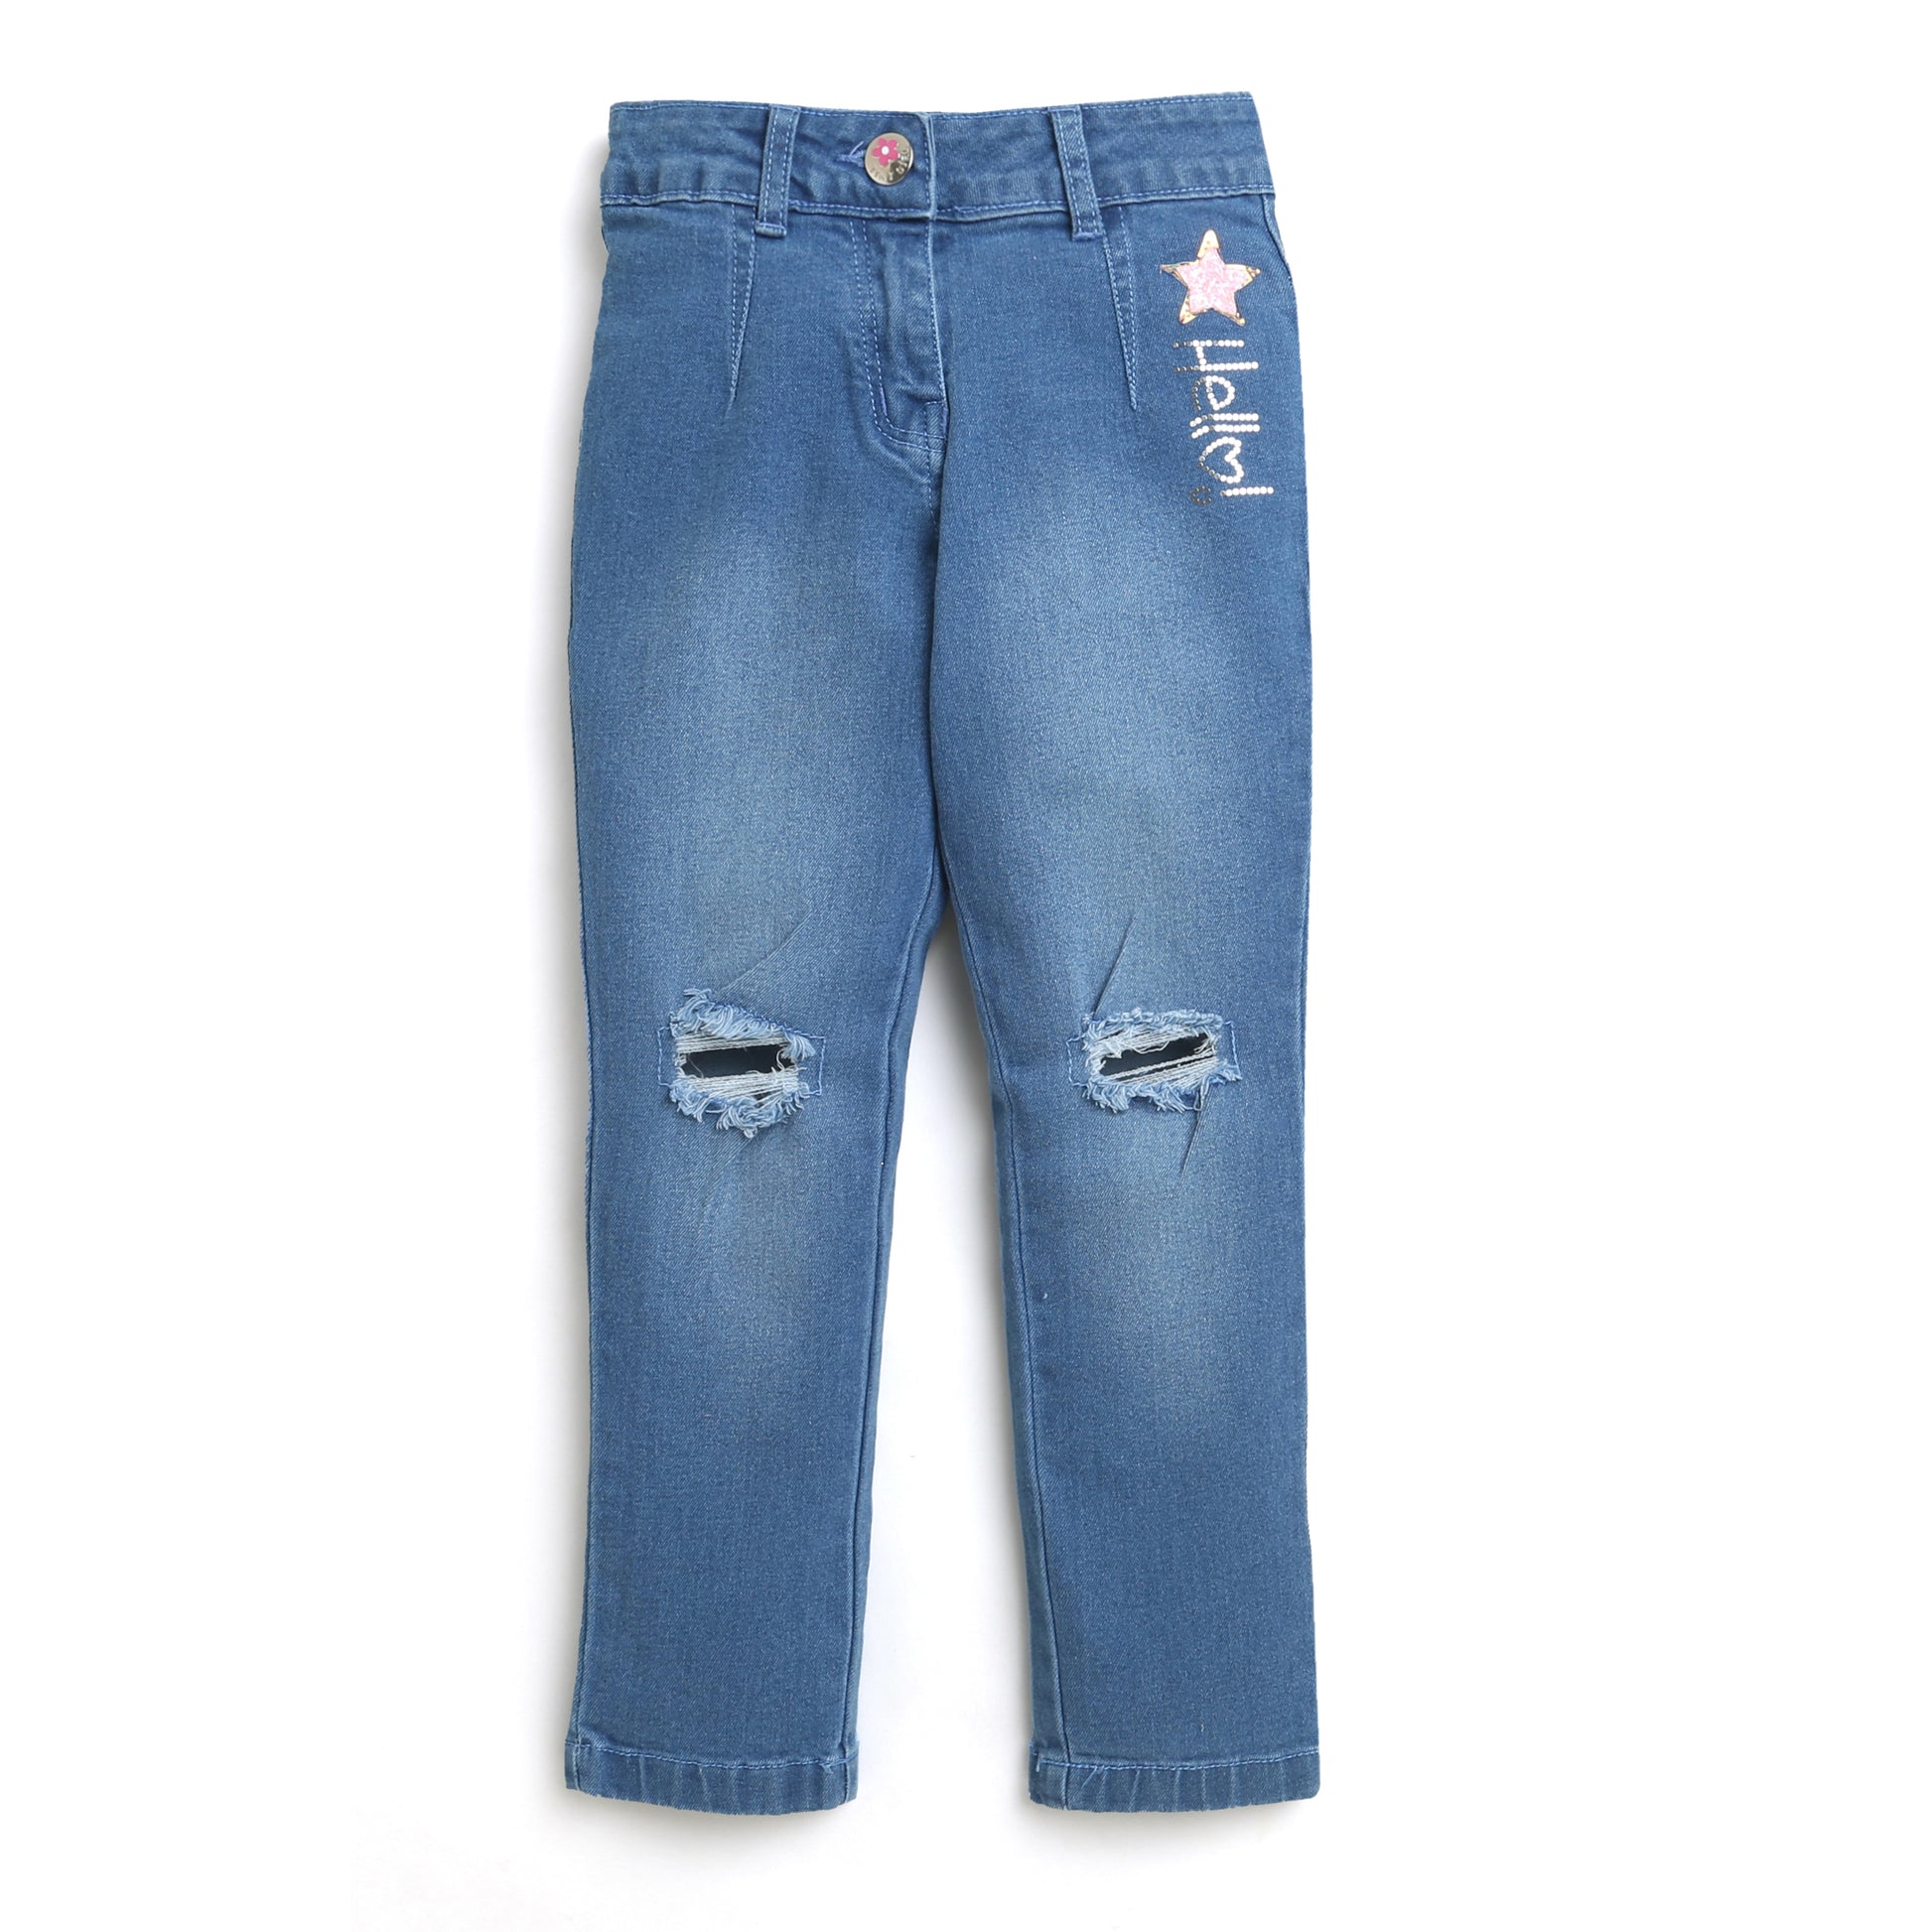 Denim Pant With Stitch Detail And Silver Foil Branding Detail.